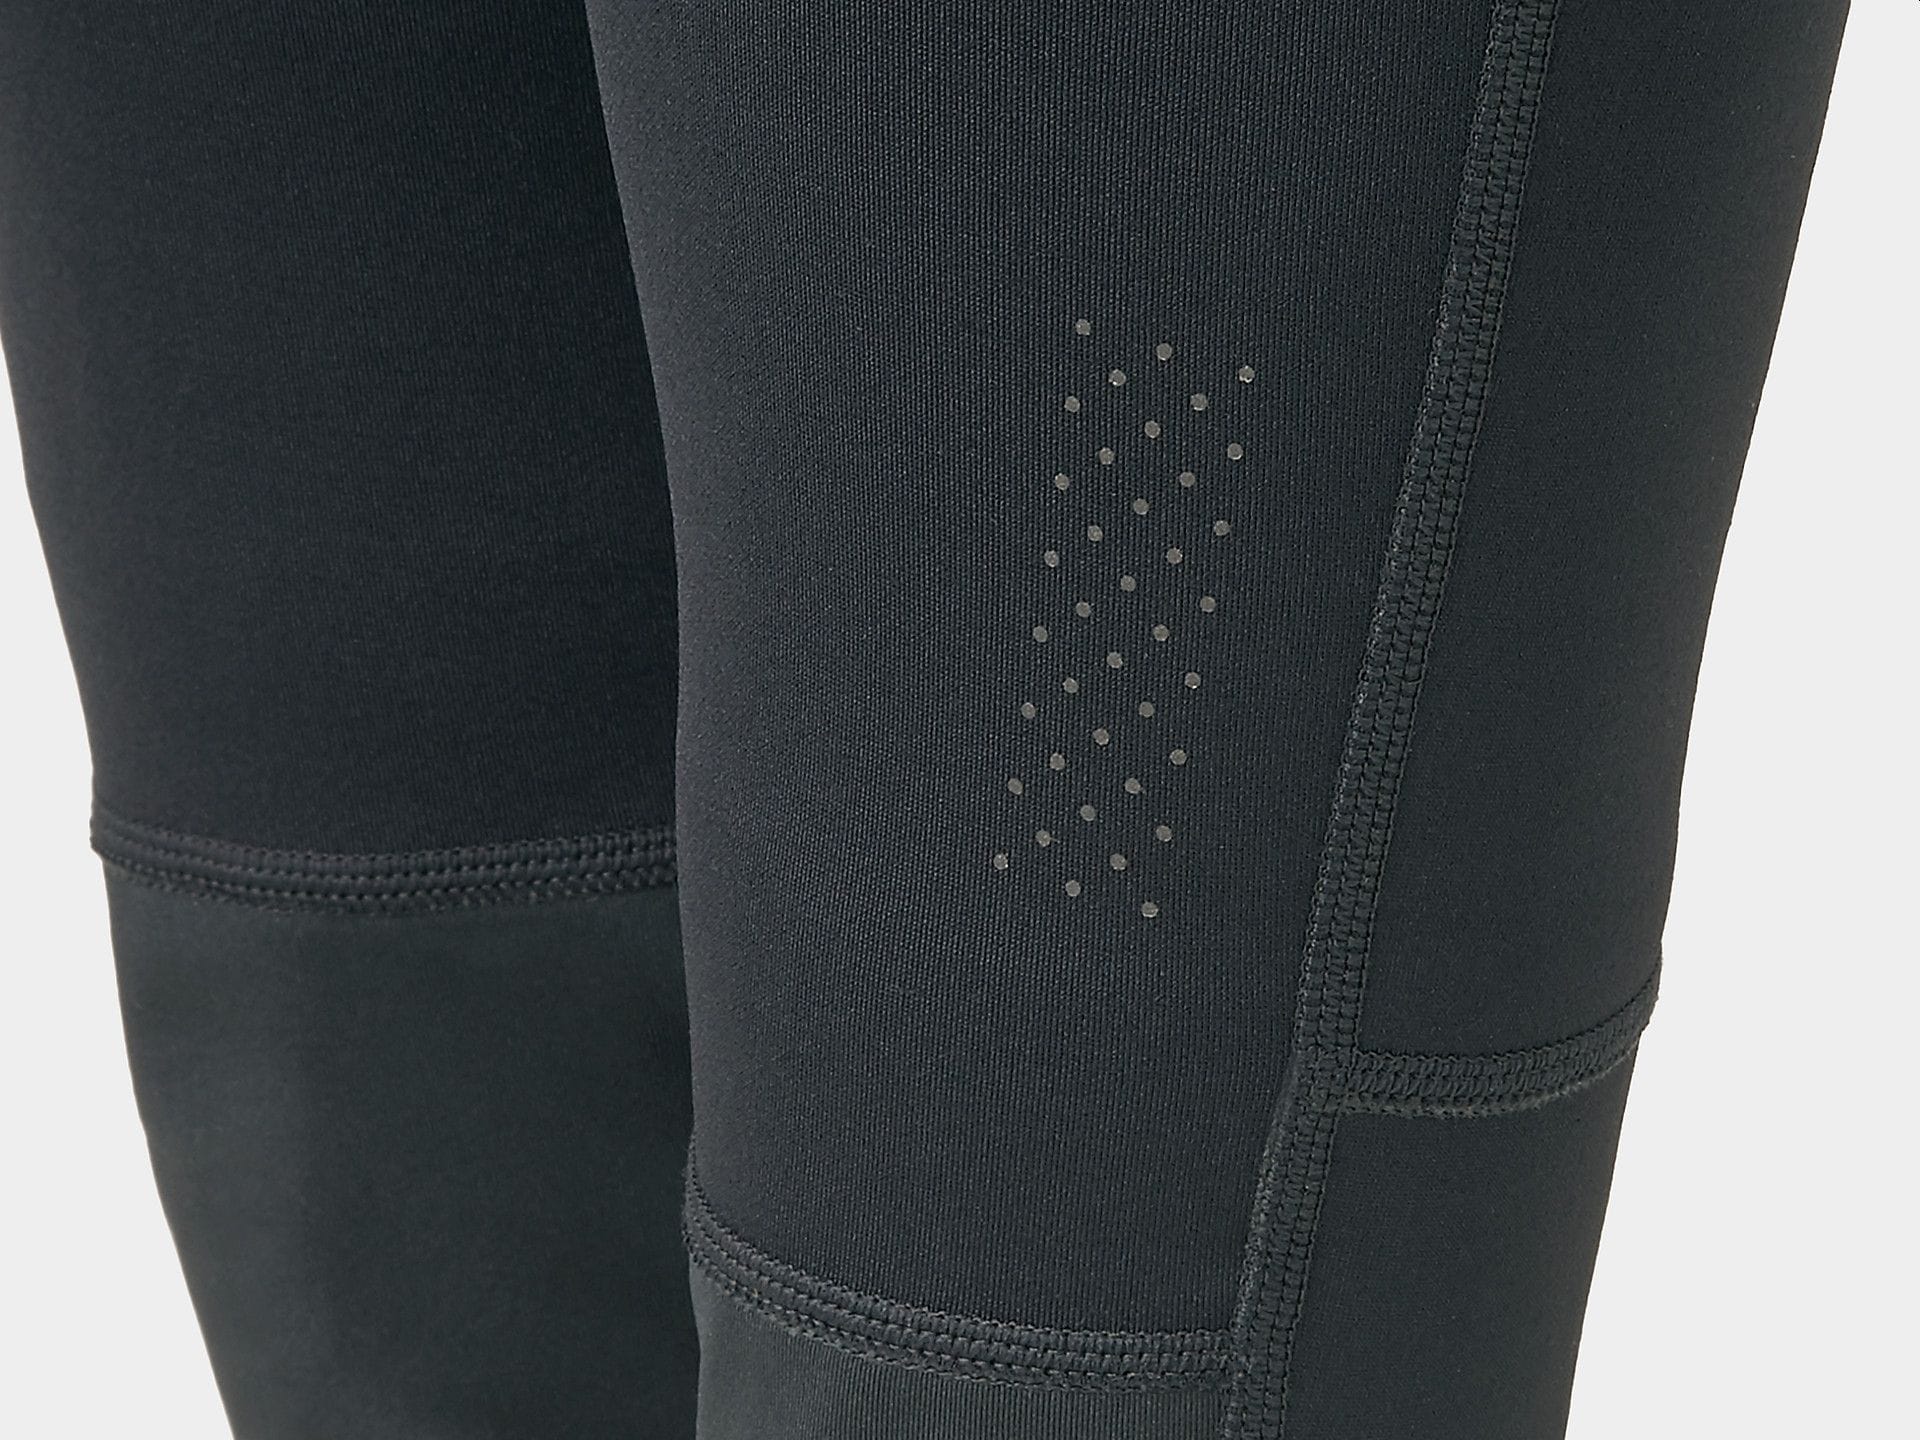 BONTRAGER CIRCUIT THERMAL UNPADDED TIGHTS